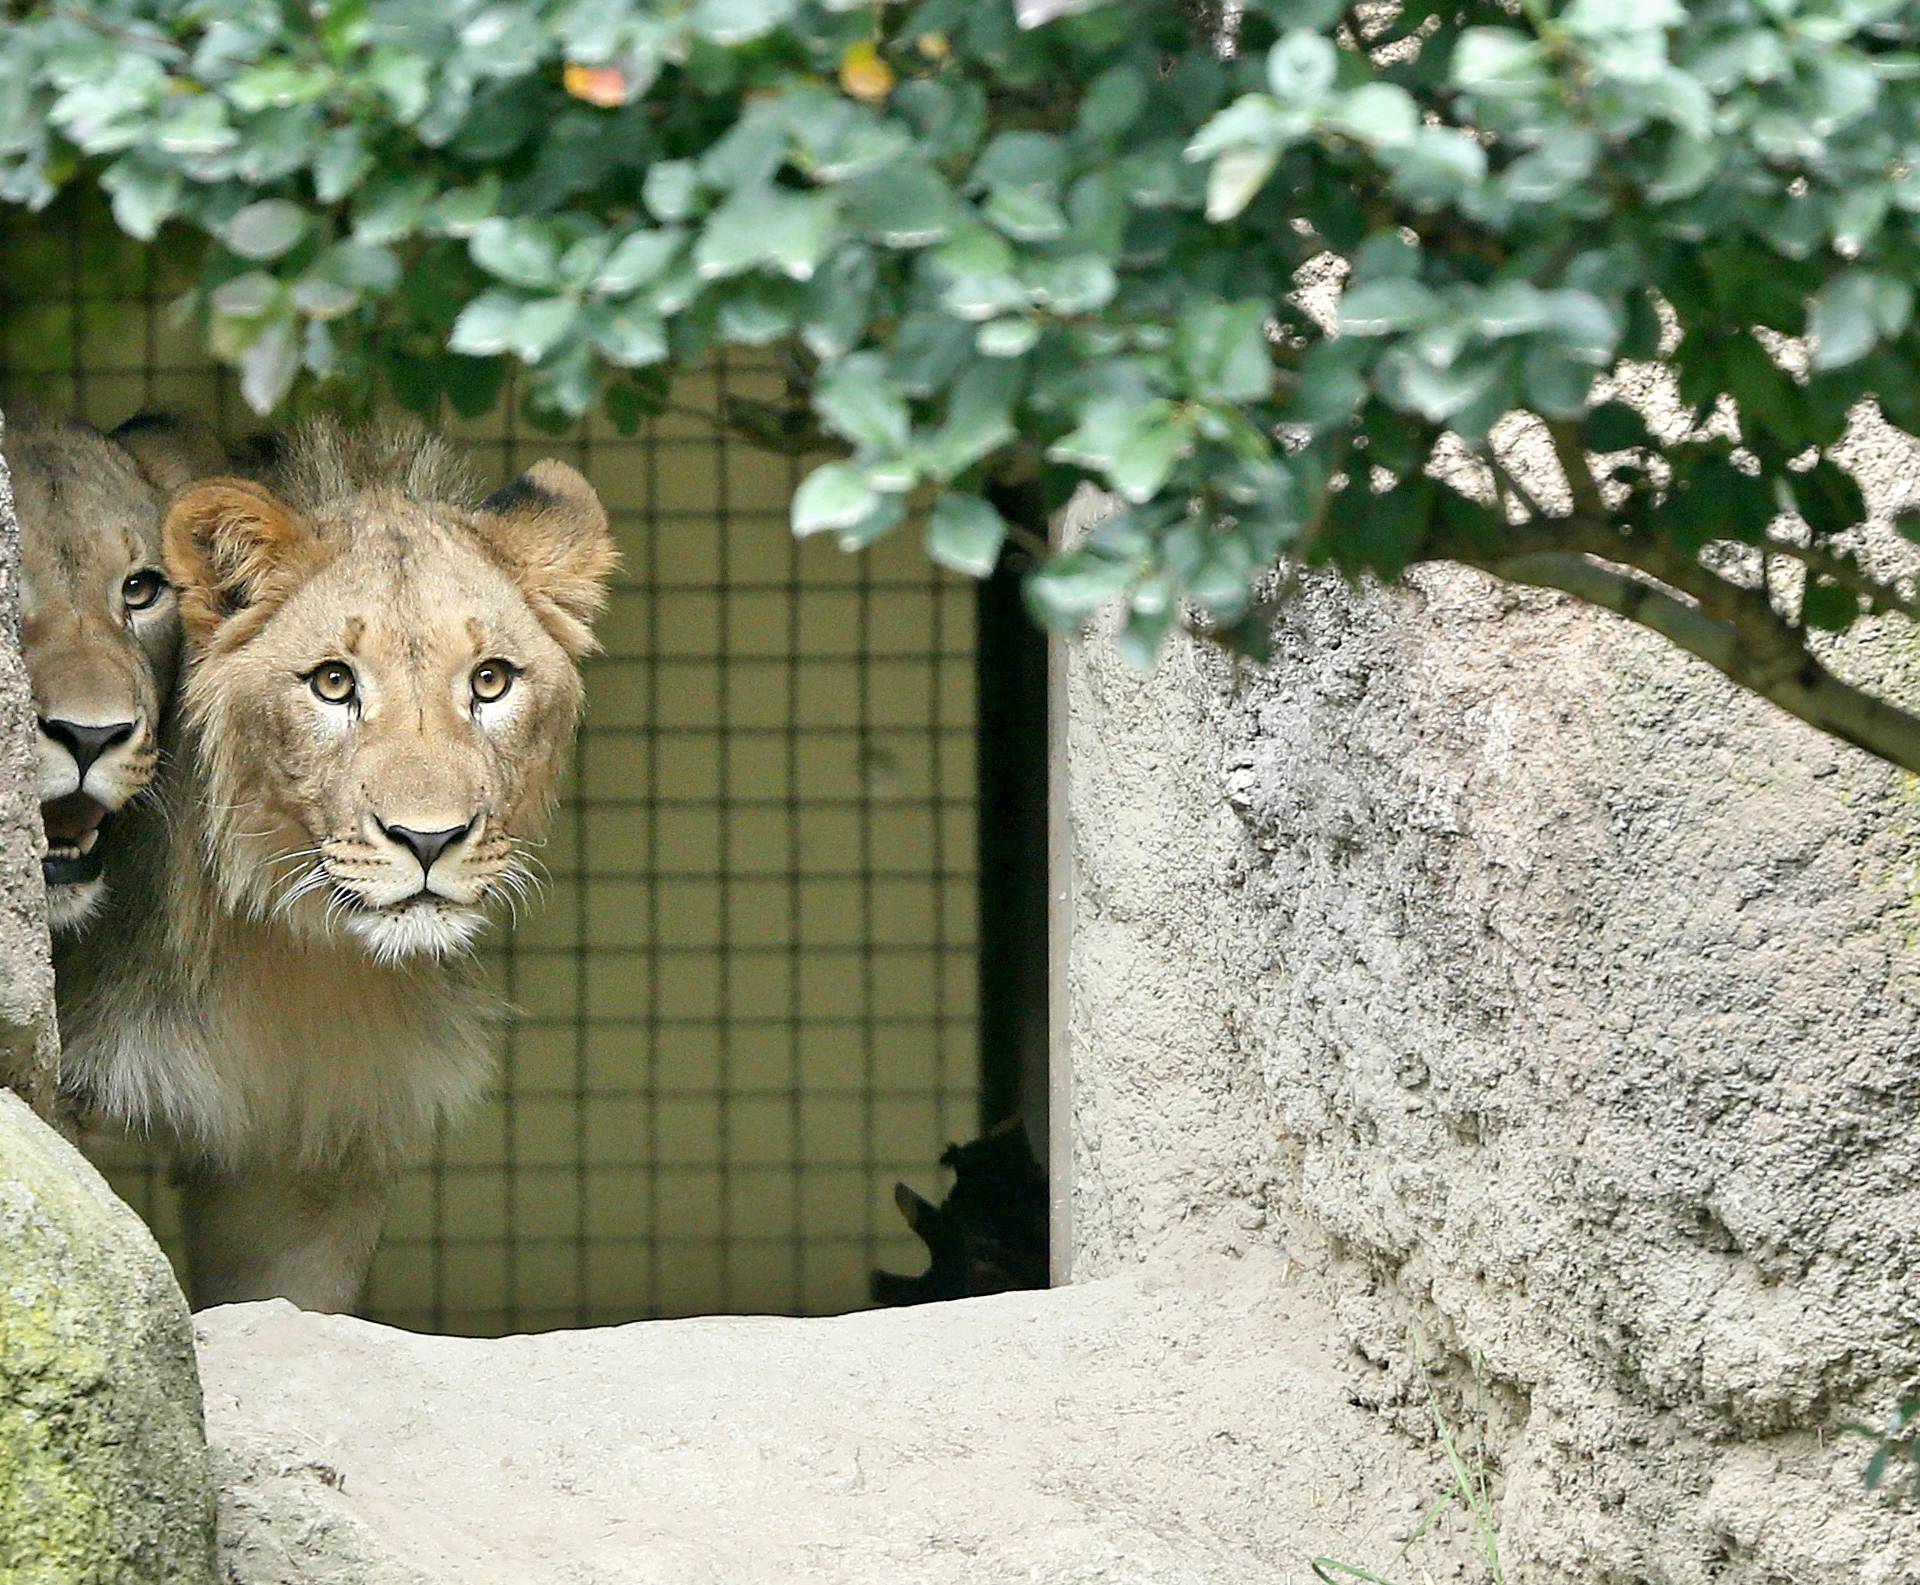 New Lions explore their enclosure at the zoo in Leipzig